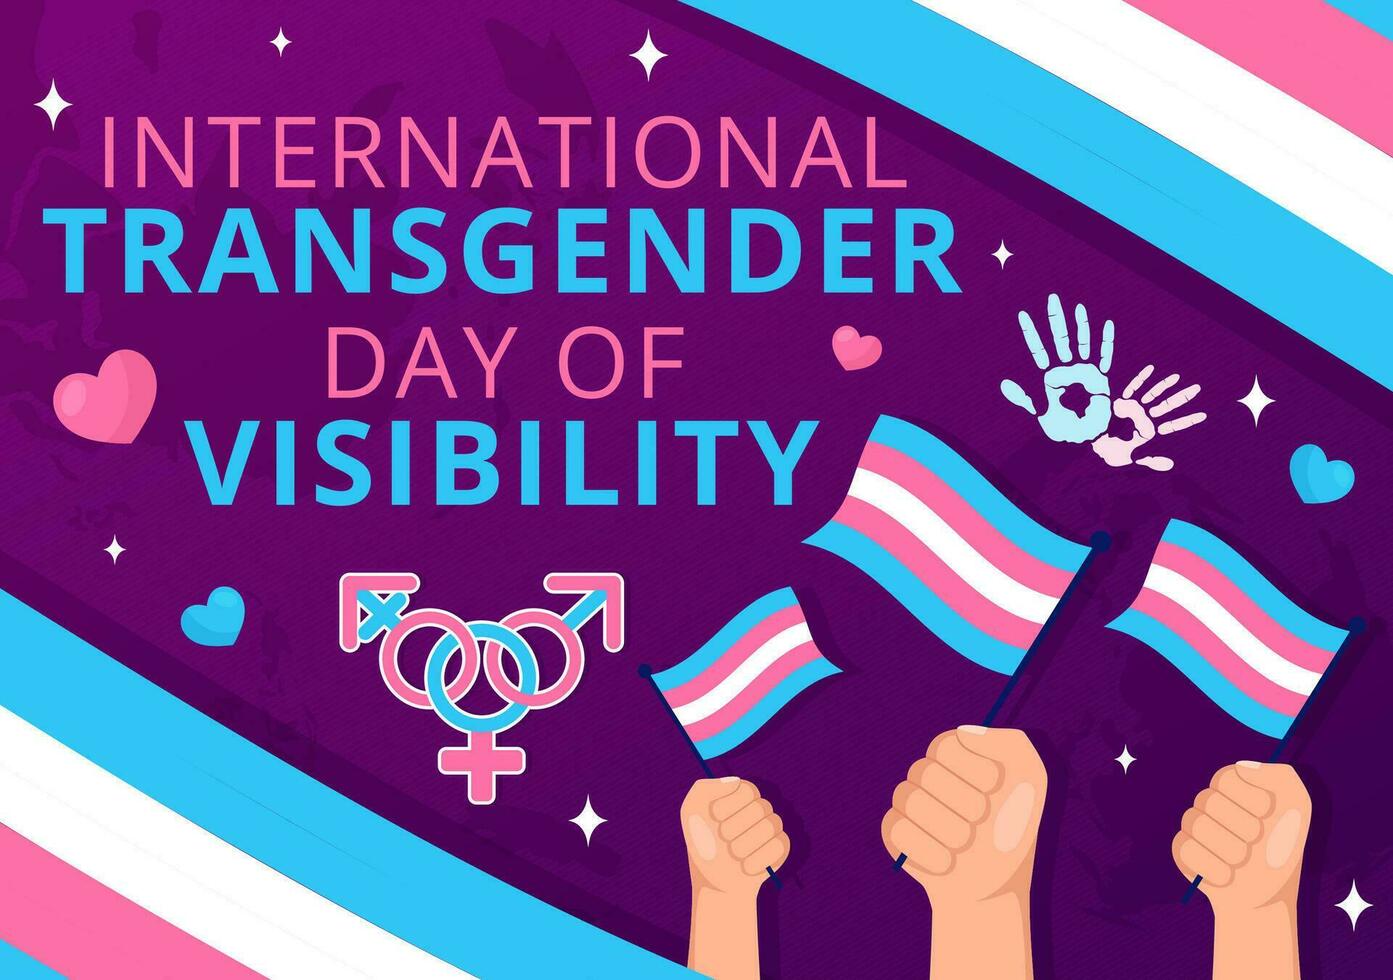 International Transgender Day of Visibility Vector Illustration on March 31 with Transgenders Pride Flags and Symbol in Celebration Flat Background